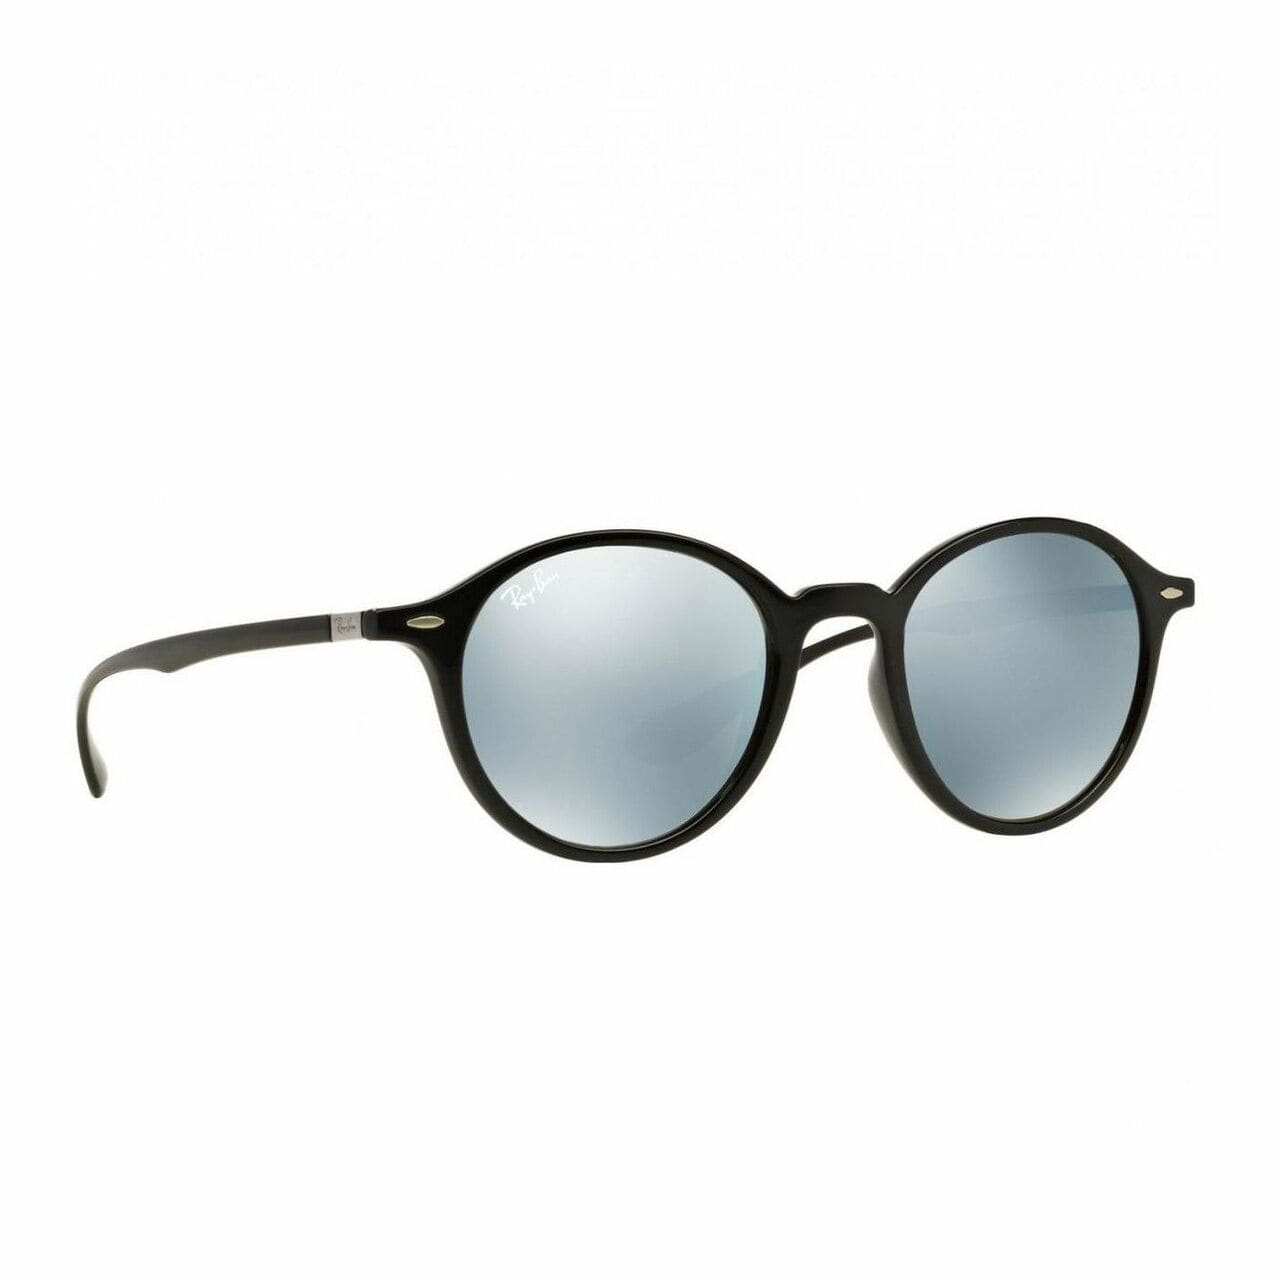 Ray-Ban RB4237-601/30 Black Round Liteforce Silver Flash Lens Sunglasses 8053672498141